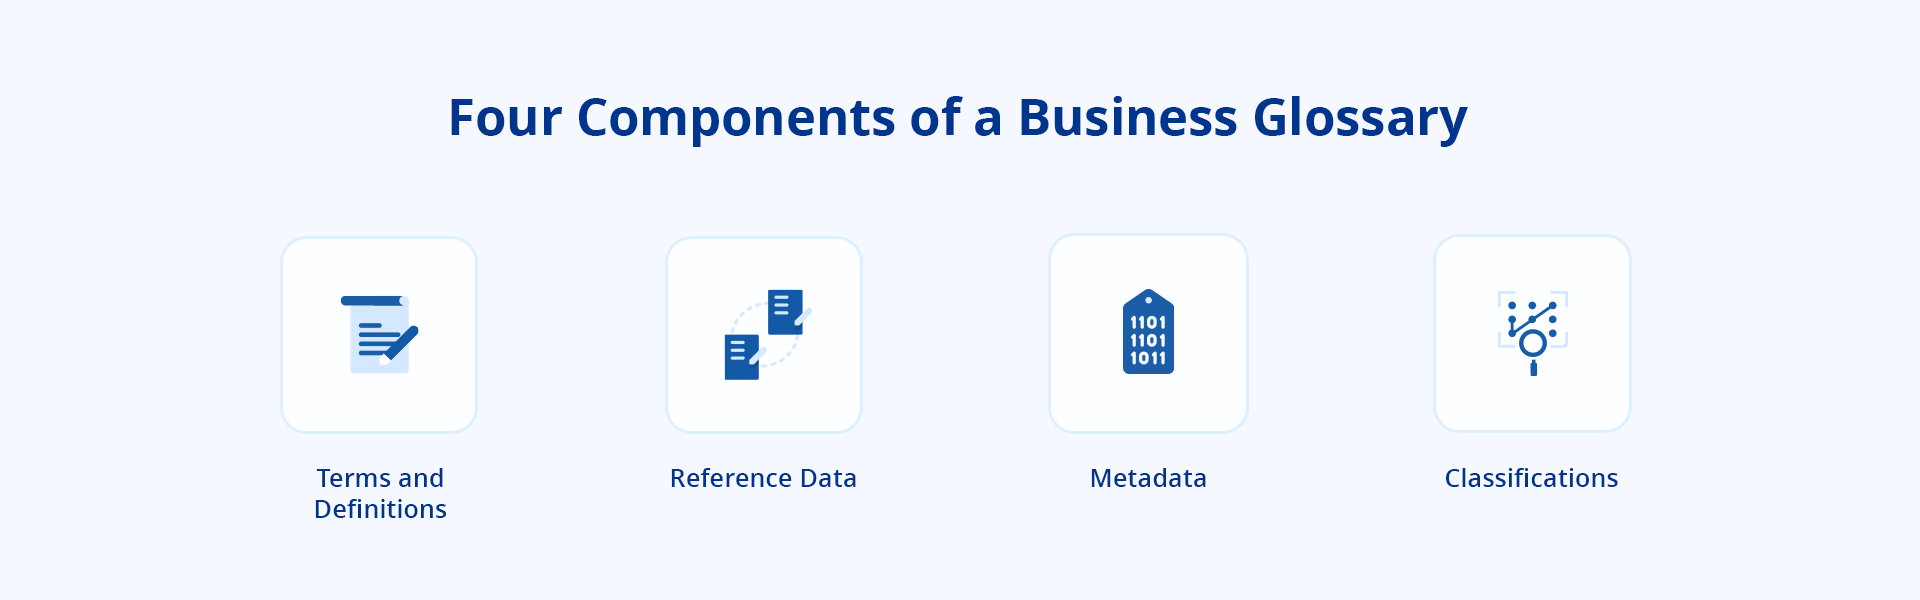 Four components of a business glossary